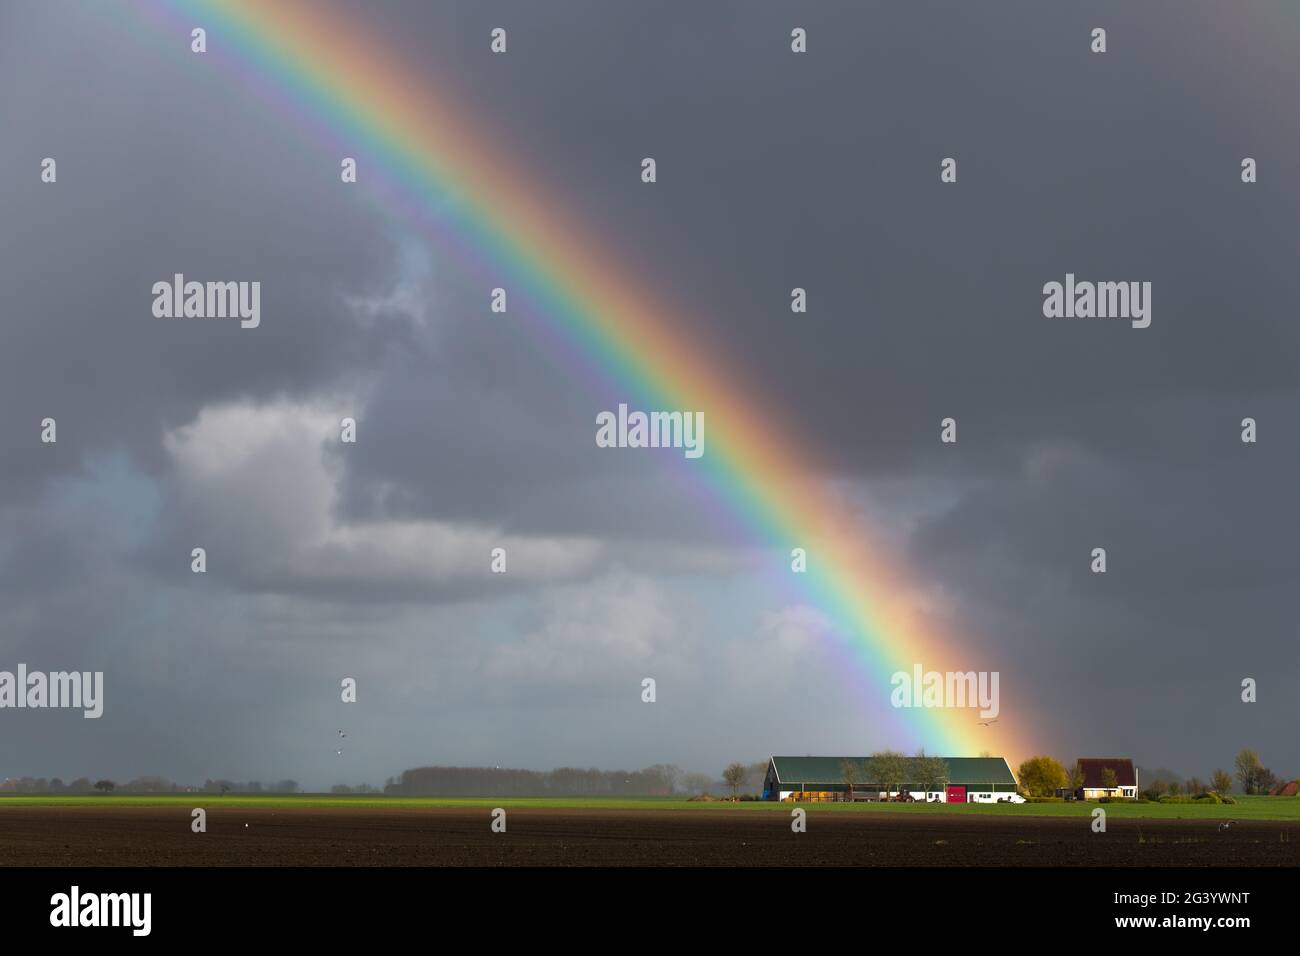 A rainbow and gray rain clouds over a field in the Netherlands Stock Photo